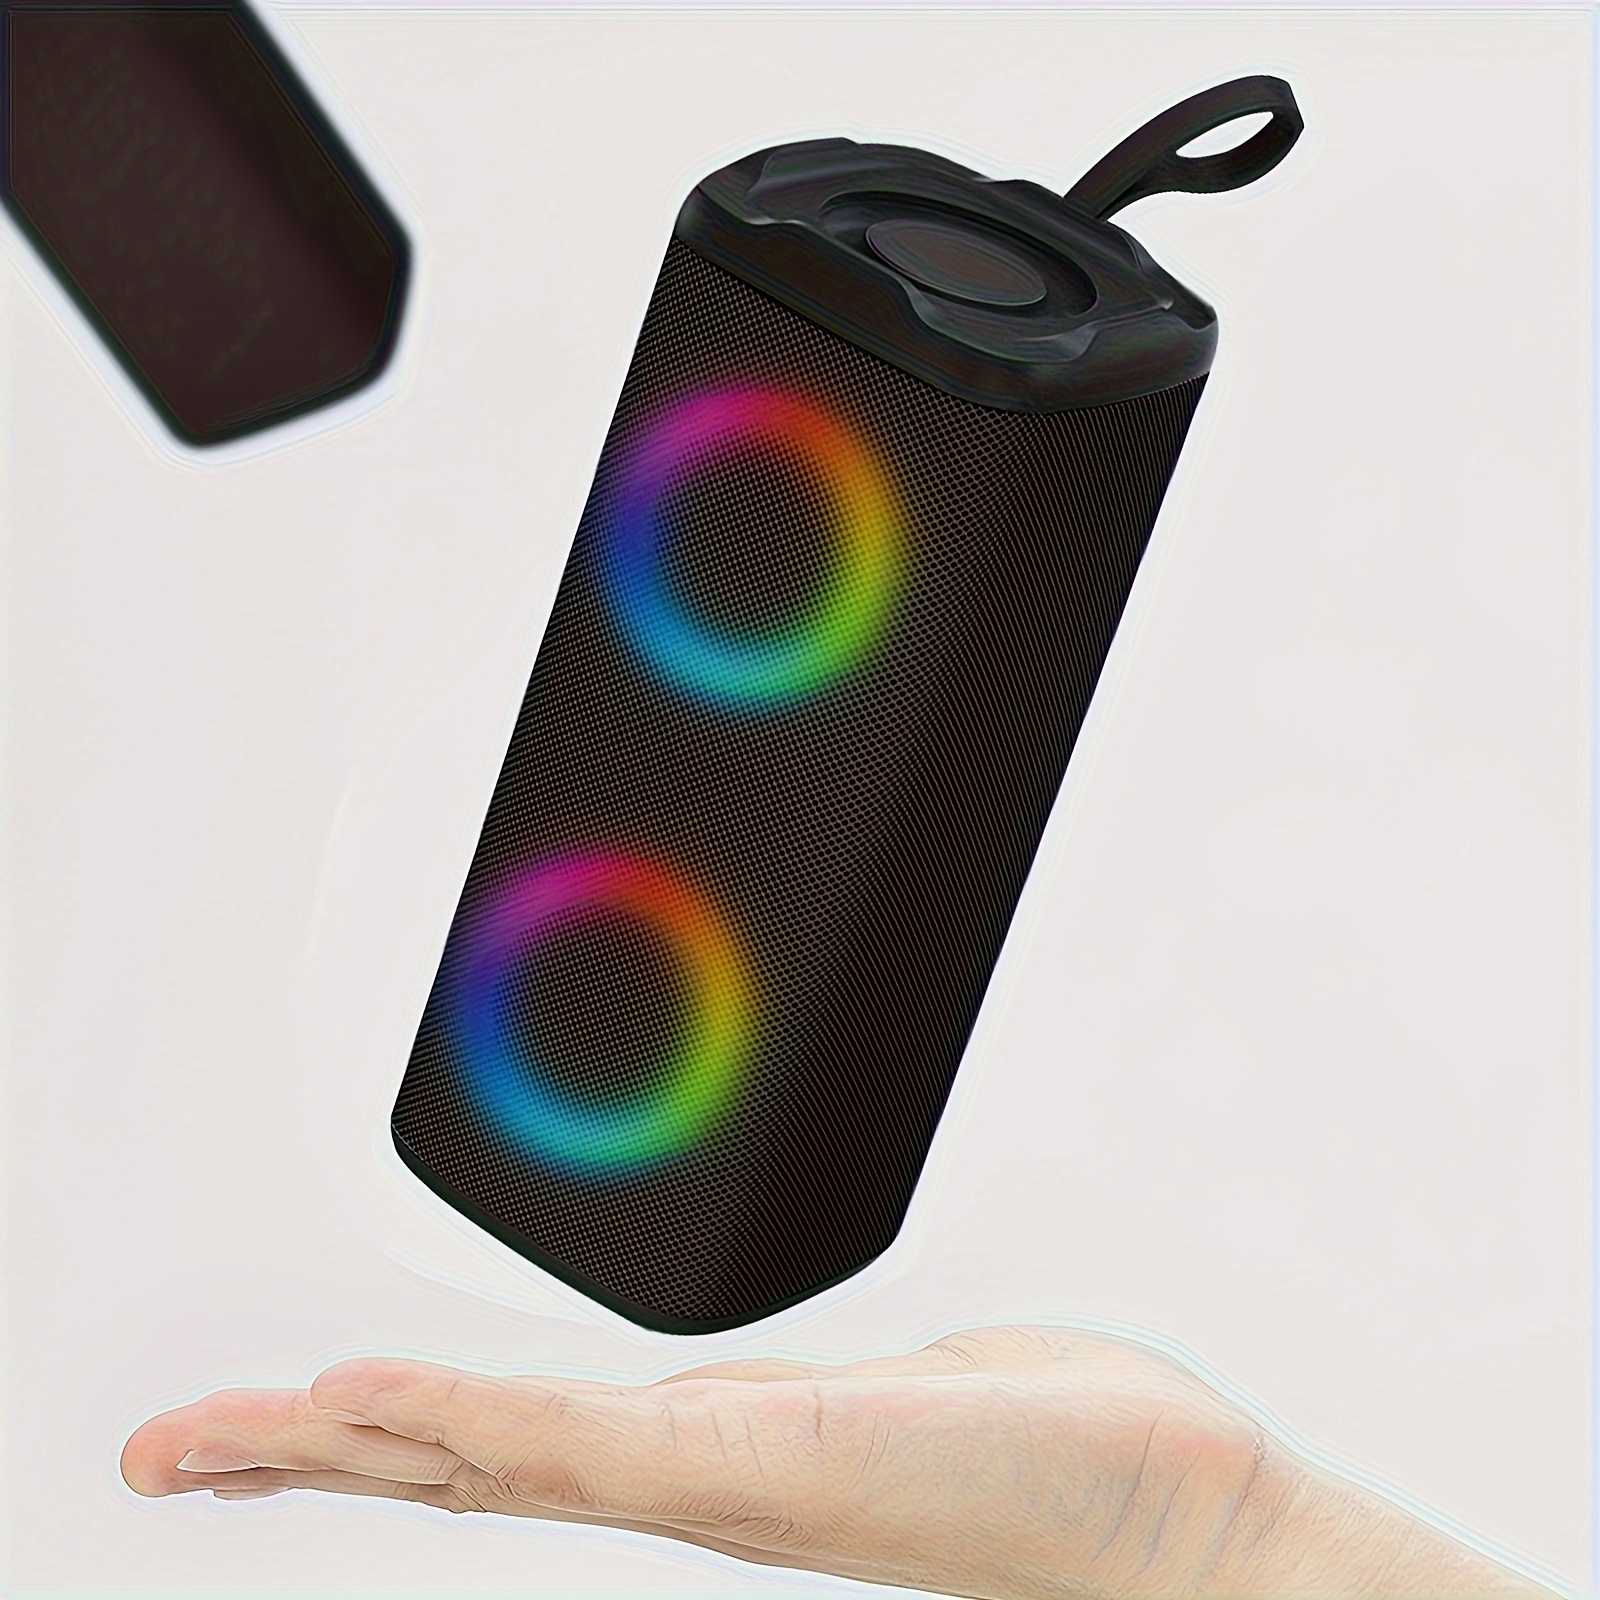 

Wireless Portable Outdoor Small Speaker Styling High-value Desktop Home Audio Gift-multi-color-1pc